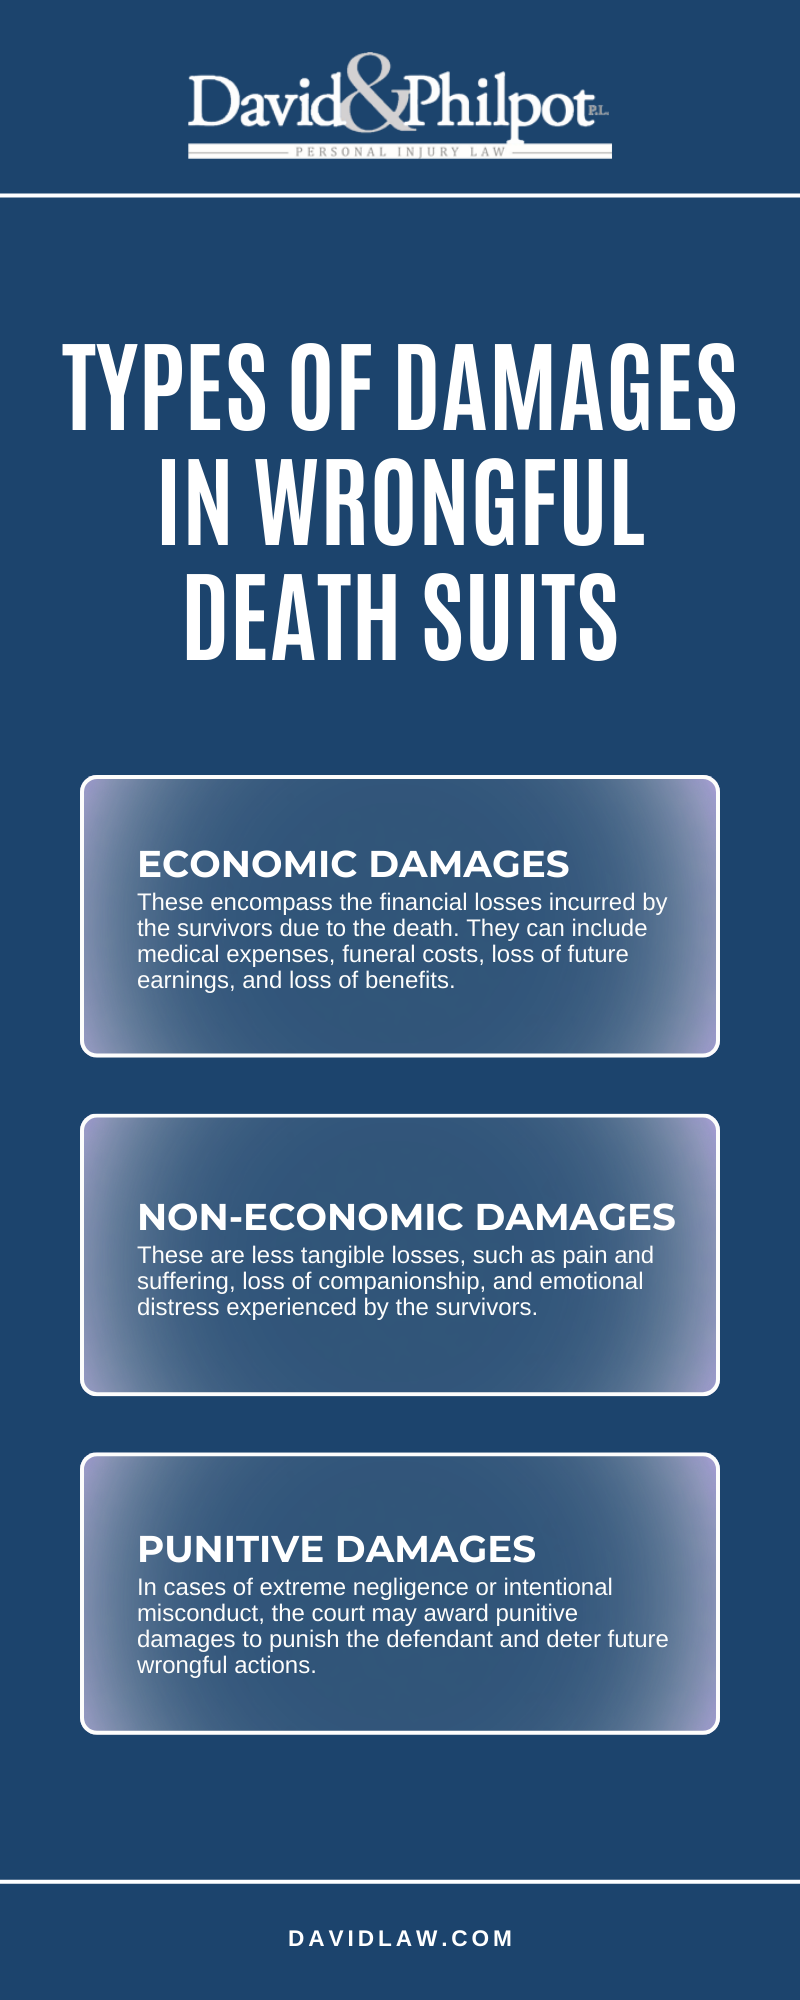 Types Of Damages In Wrongful Death Suits Infographic